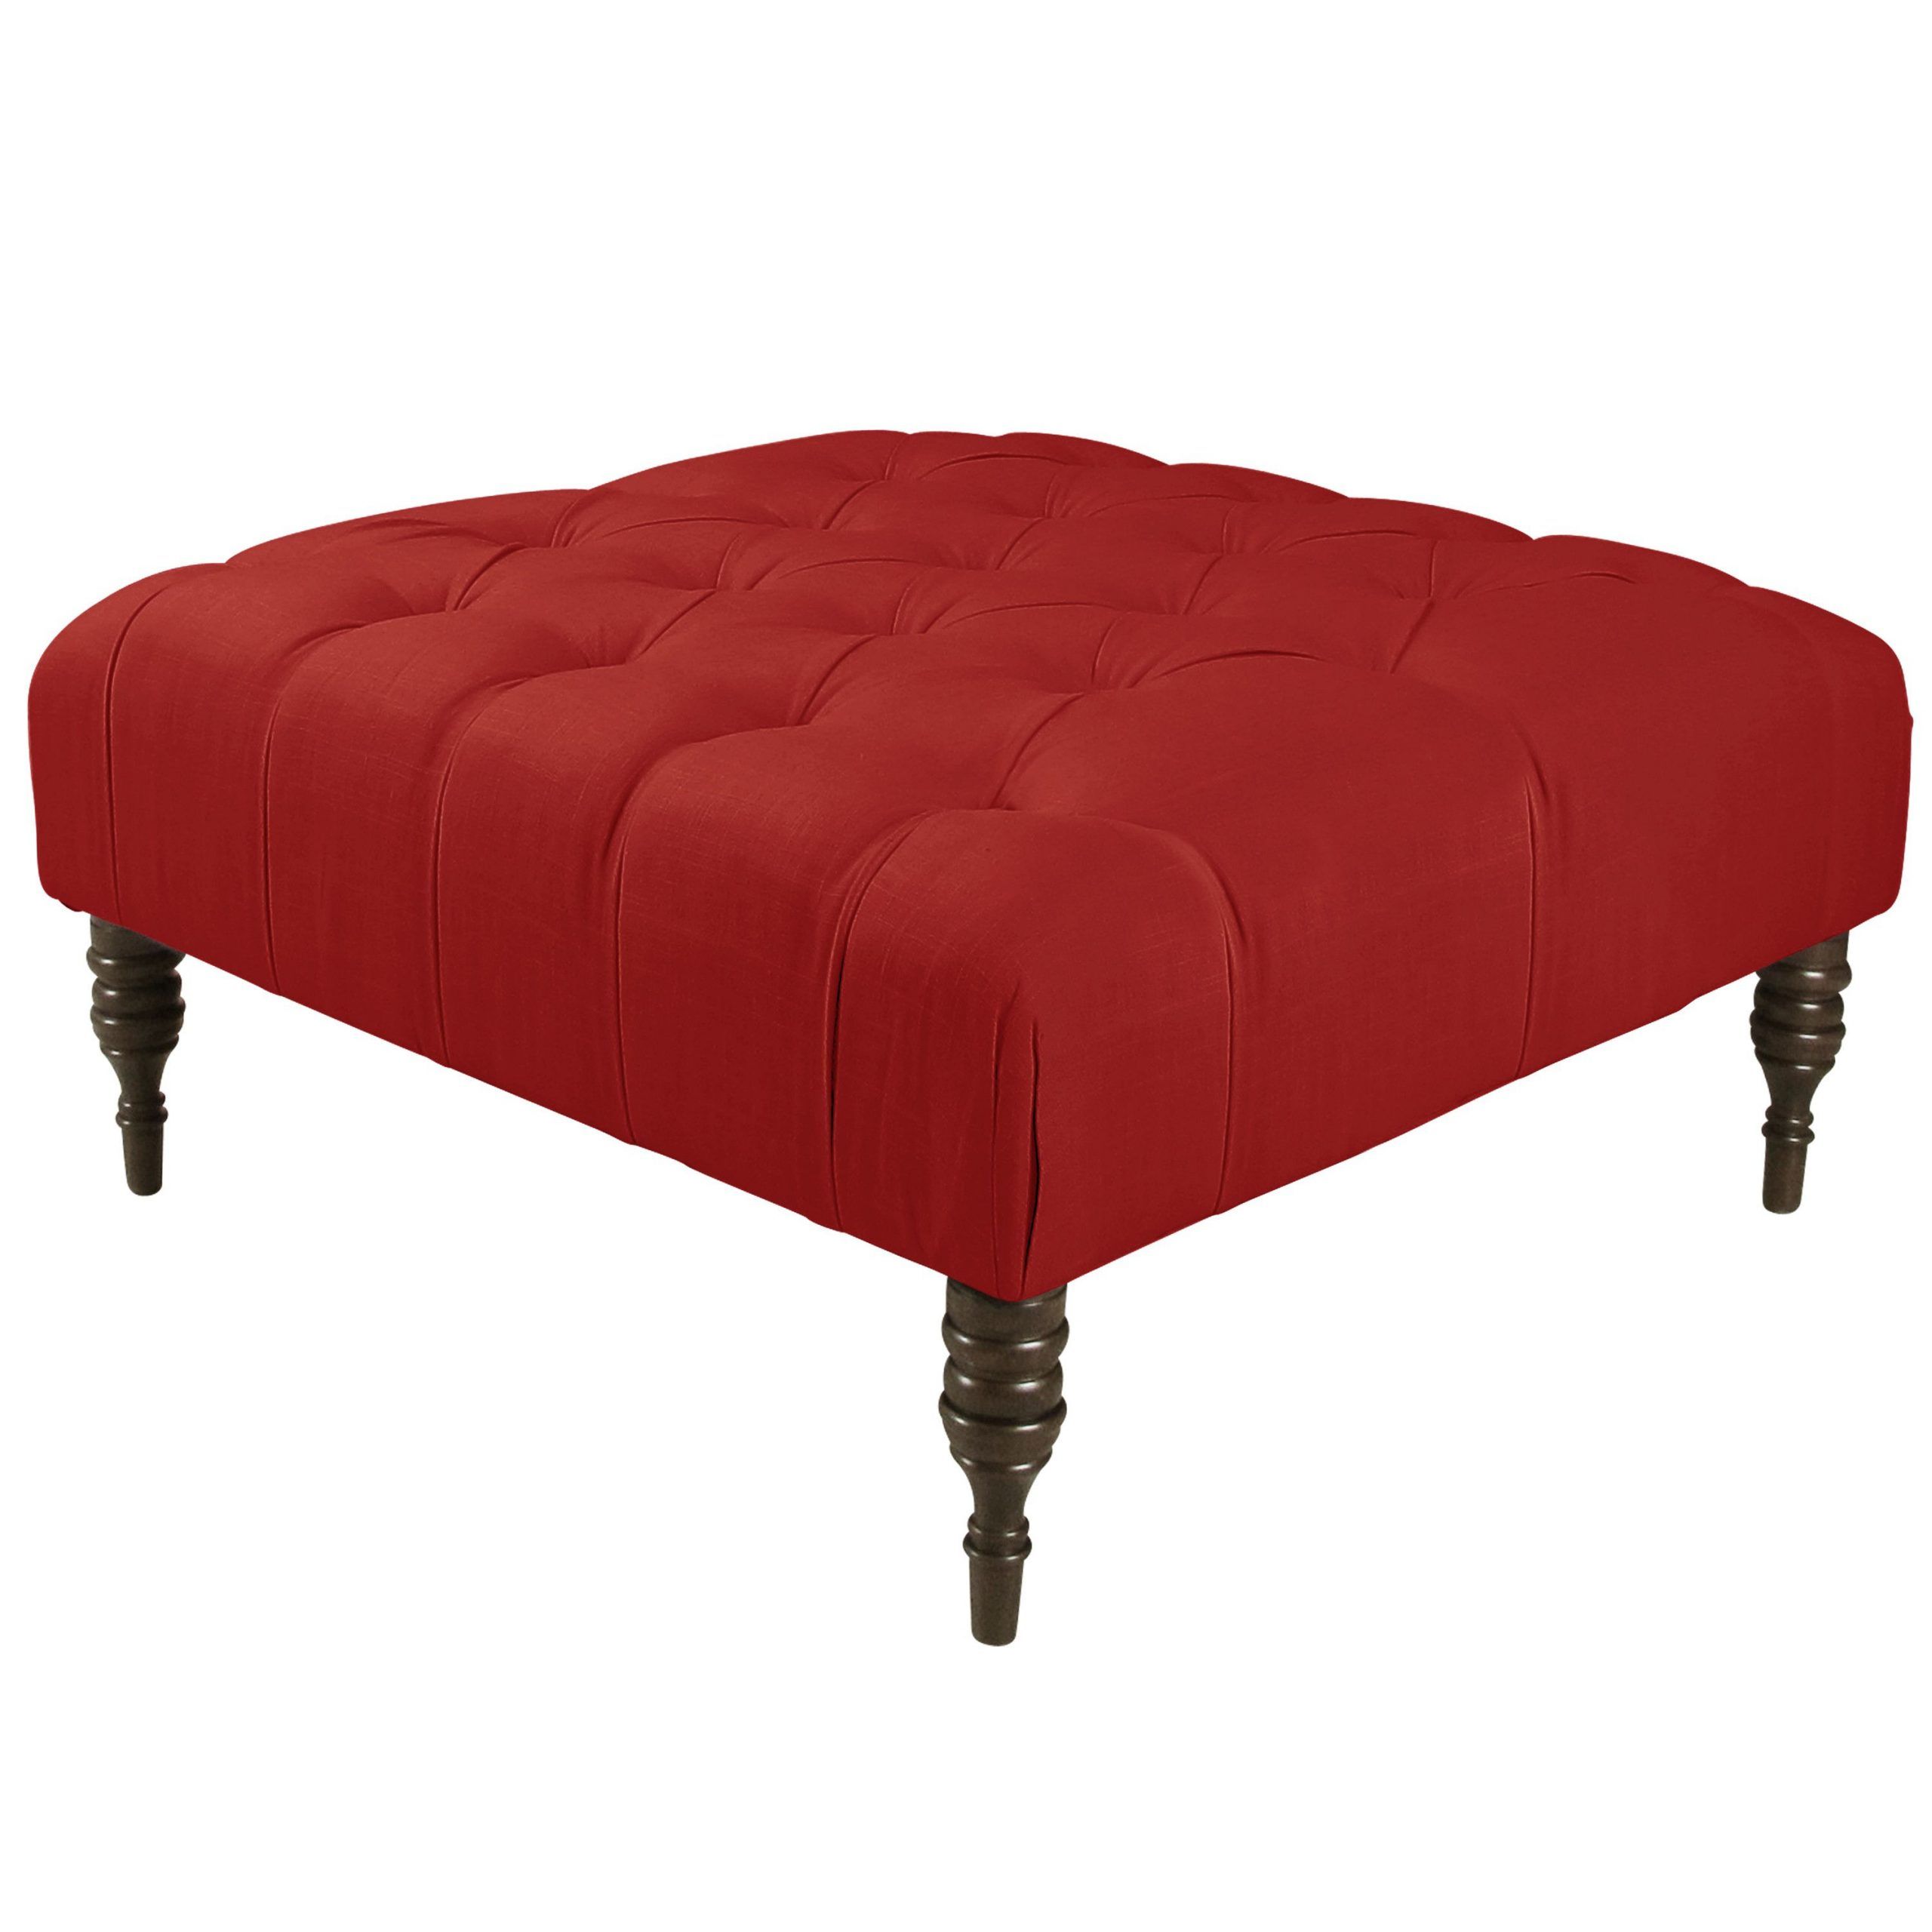 Newest Tufted Ottoman Cocktail Tables Pertaining To Customer Image Zoomed (View 4 of 10)